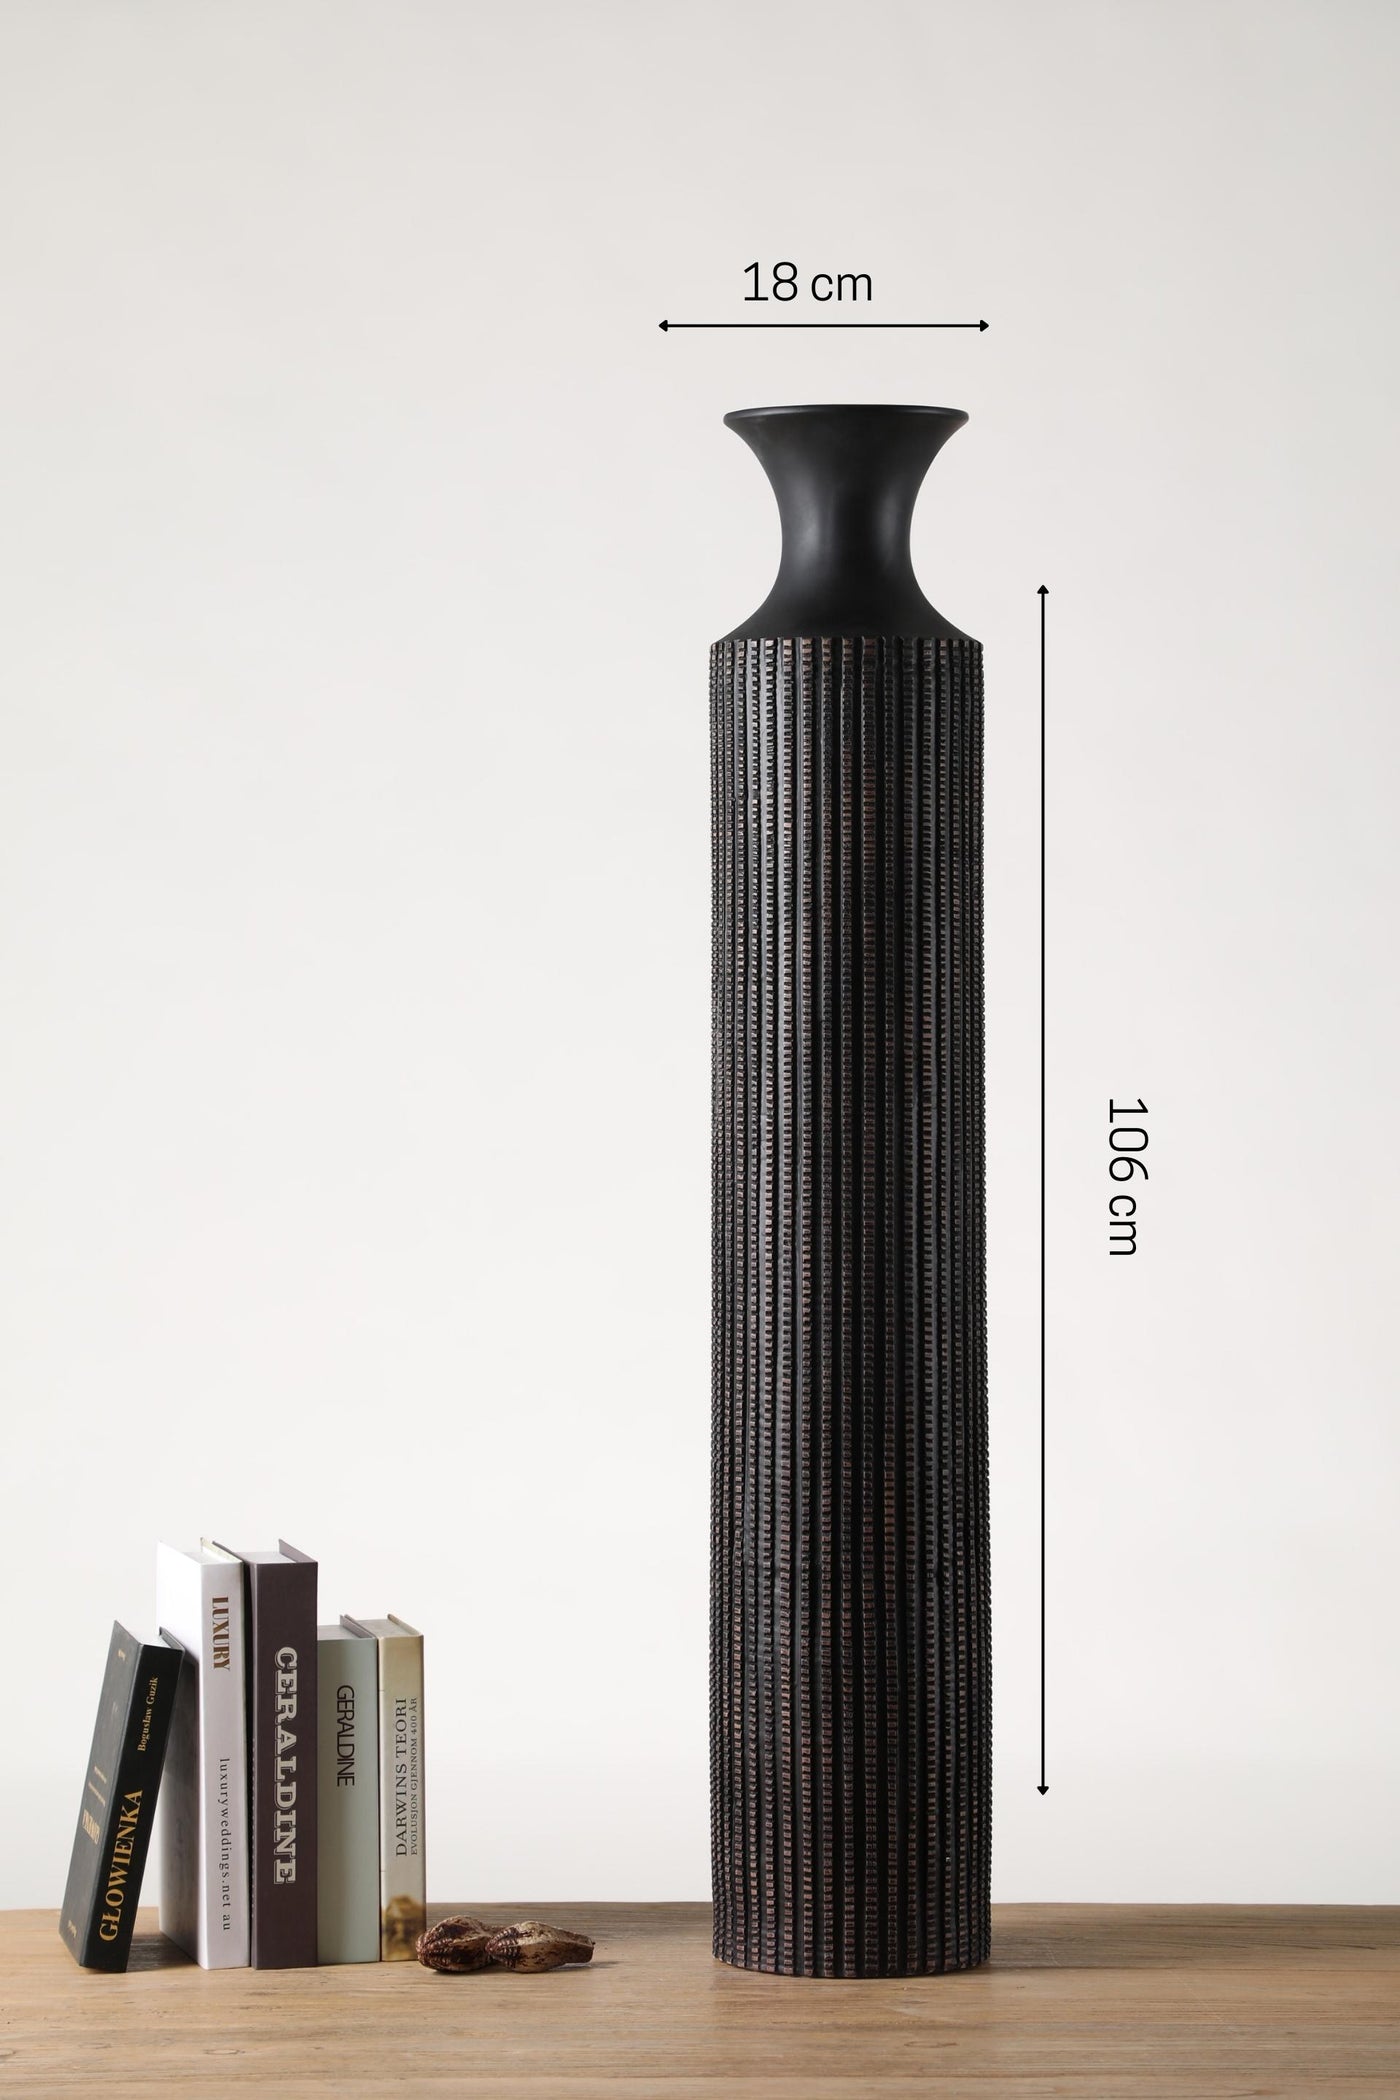 Tall and slender  with fine and long stripes resin vase for your home or office decor